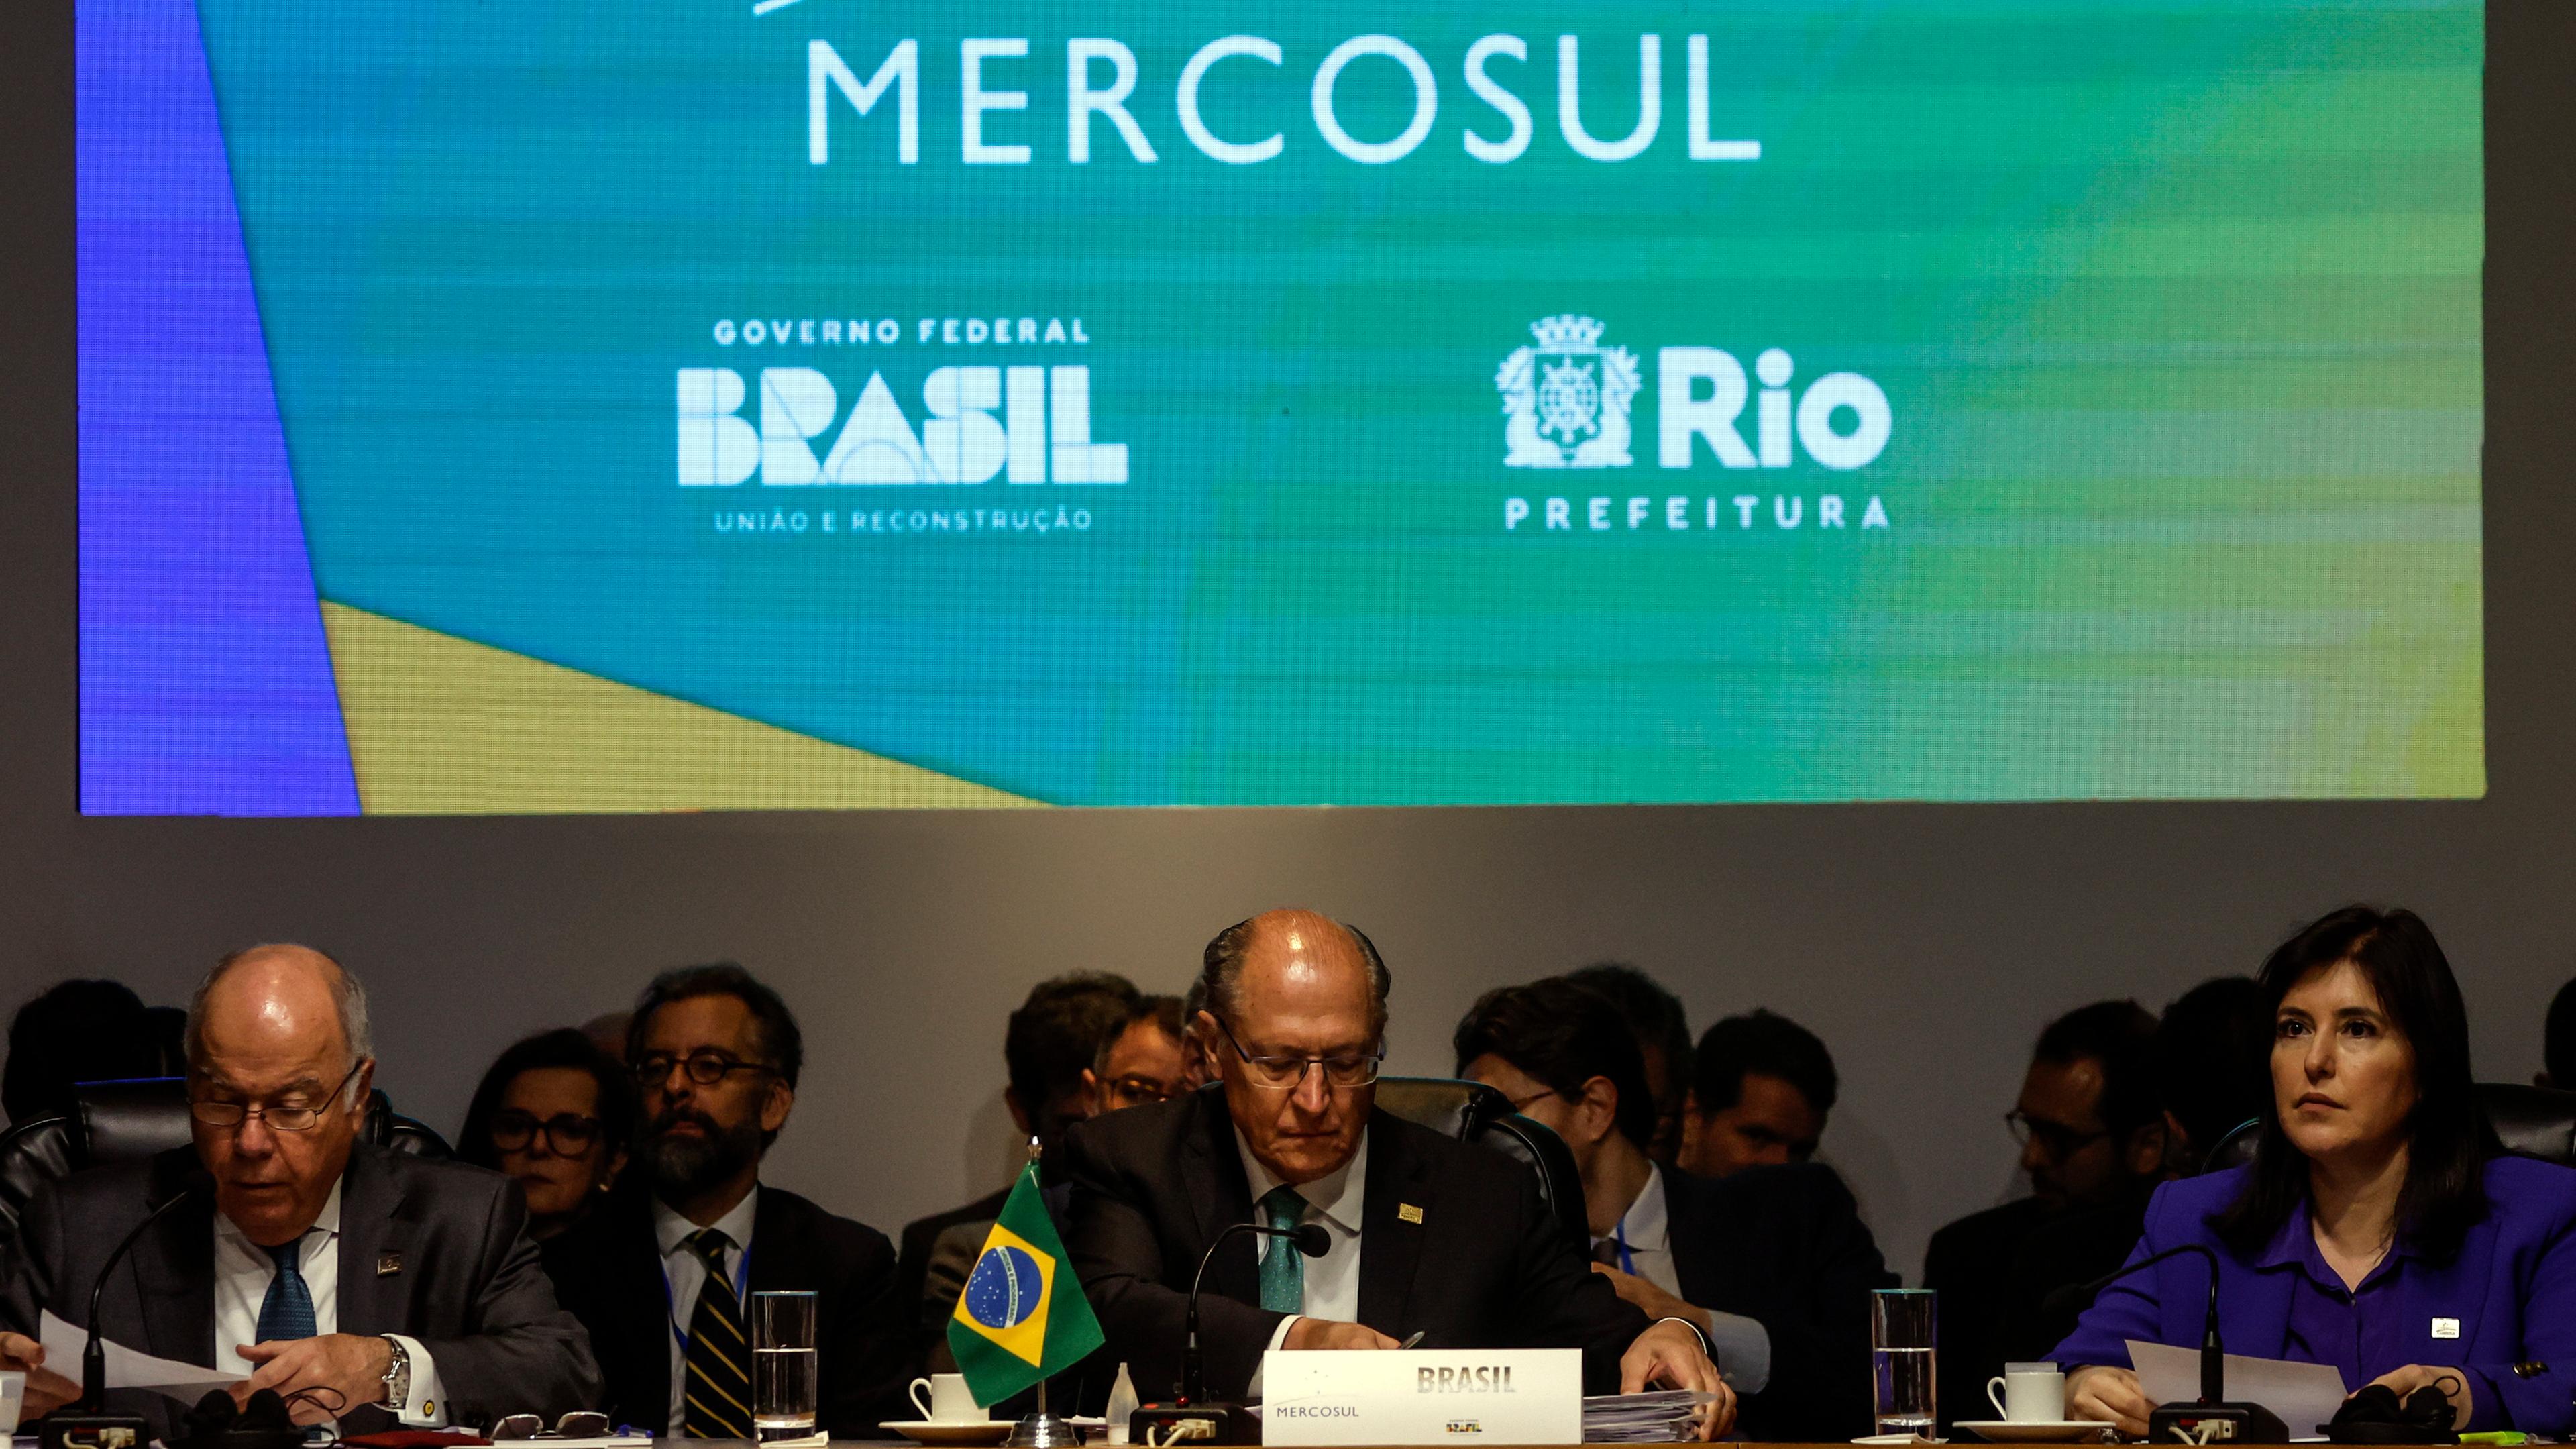 Meeting of Foreign and Economy Ministers of the Mercosur countries in Rio